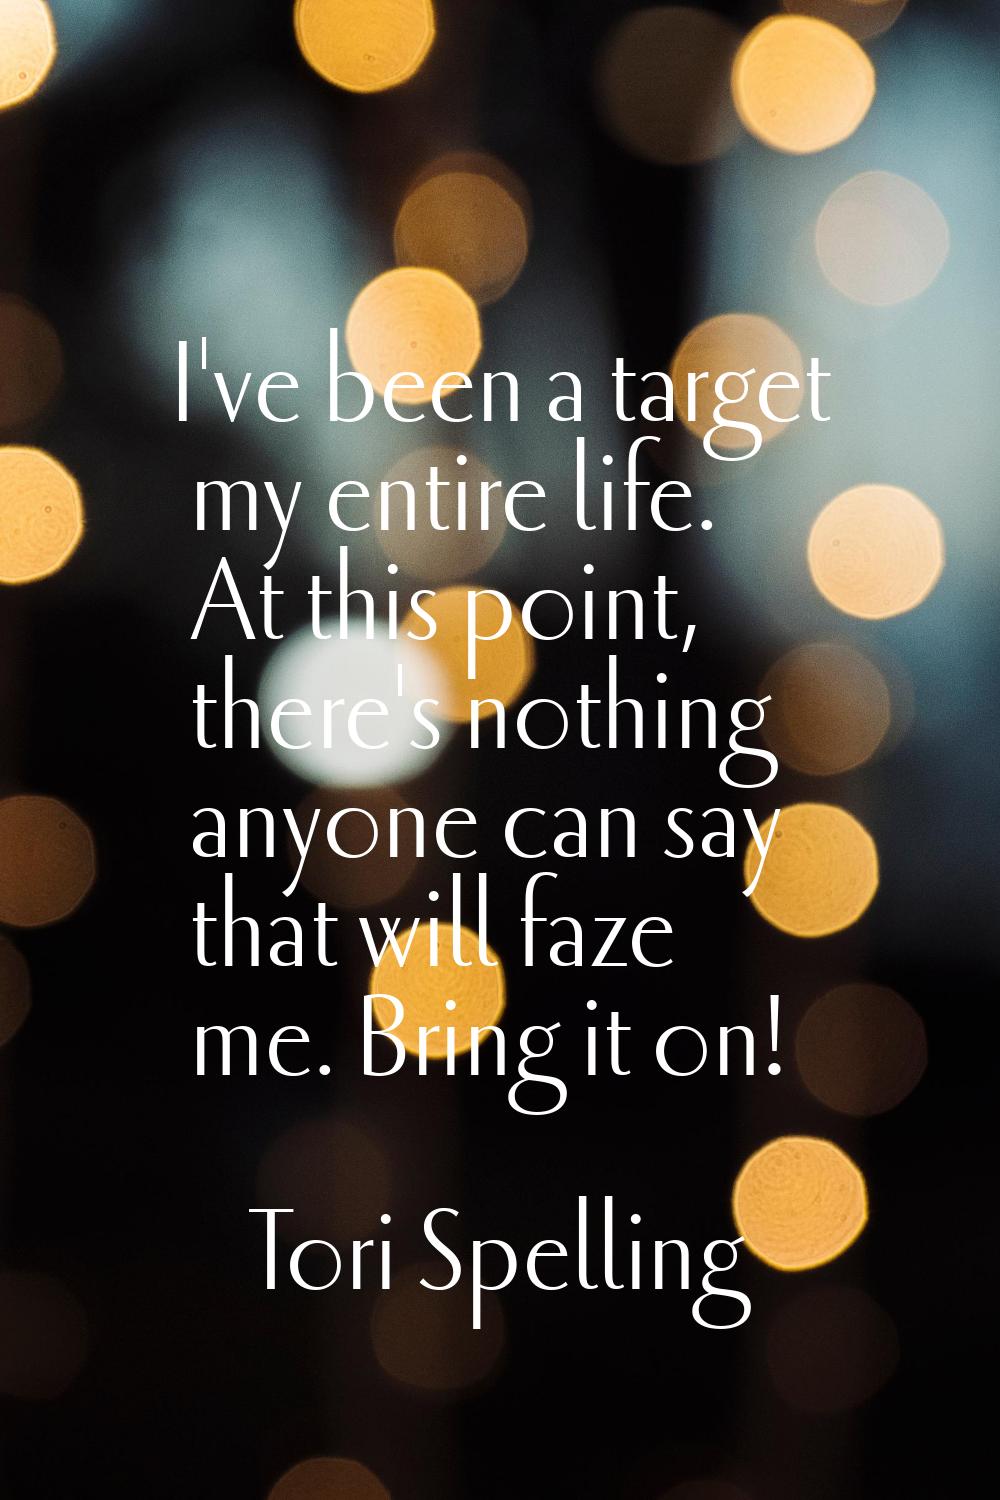 I've been a target my entire life. At this point, there's nothing anyone can say that will faze me.